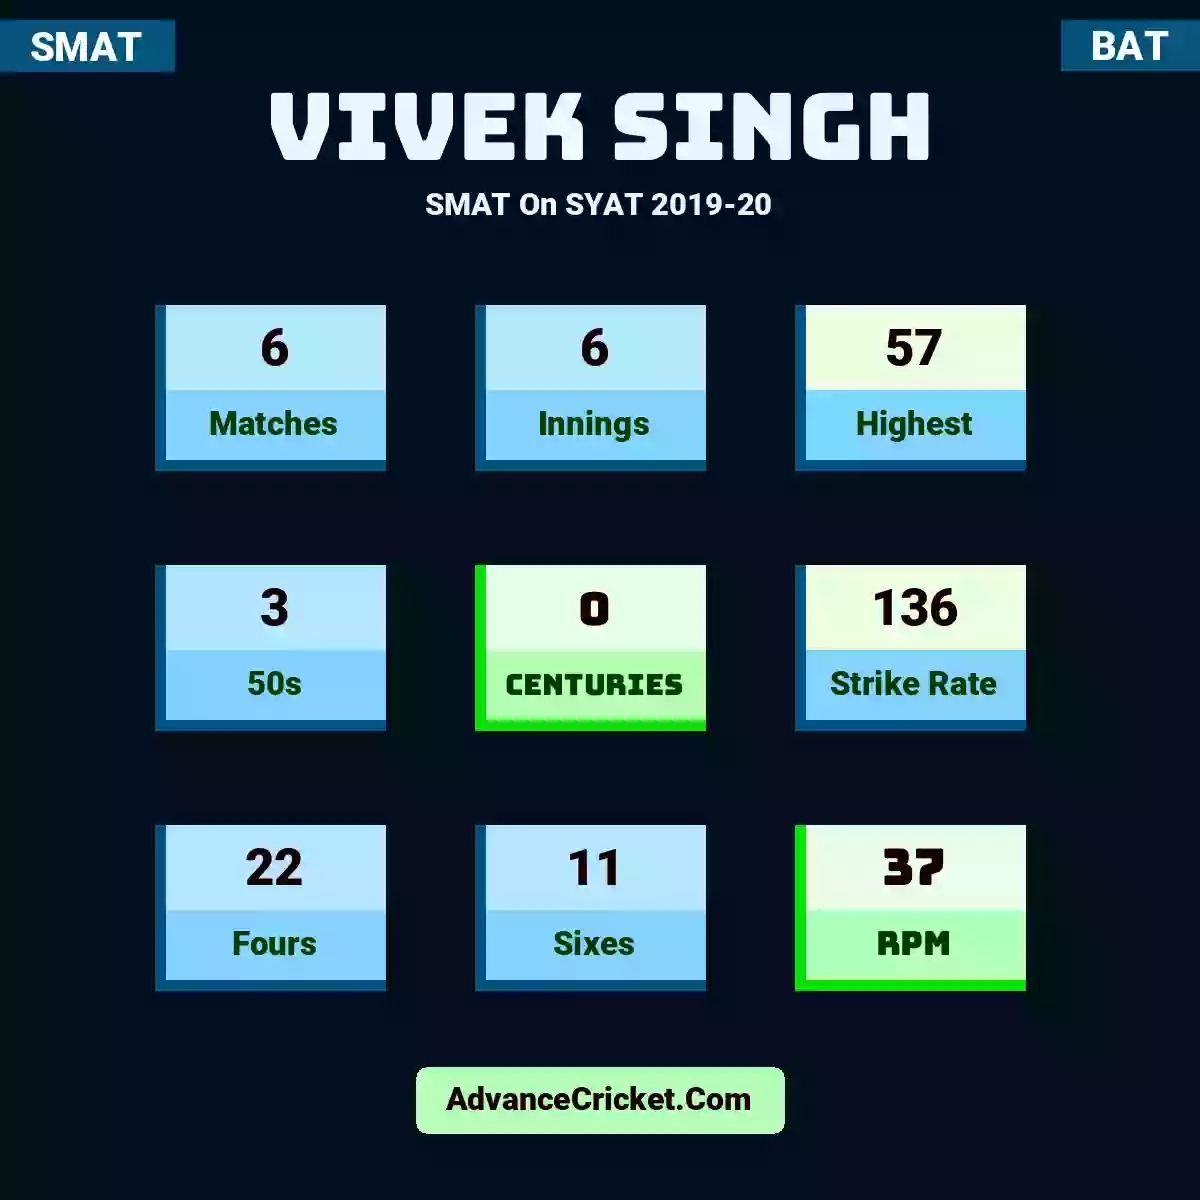 Vivek Singh SMAT  On SYAT 2019-20, Vivek Singh played 6 matches, scored 57 runs as highest, 3 half-centuries, and 0 centuries, with a strike rate of 136. V.Singh hit 22 fours and 11 sixes, with an RPM of 37.